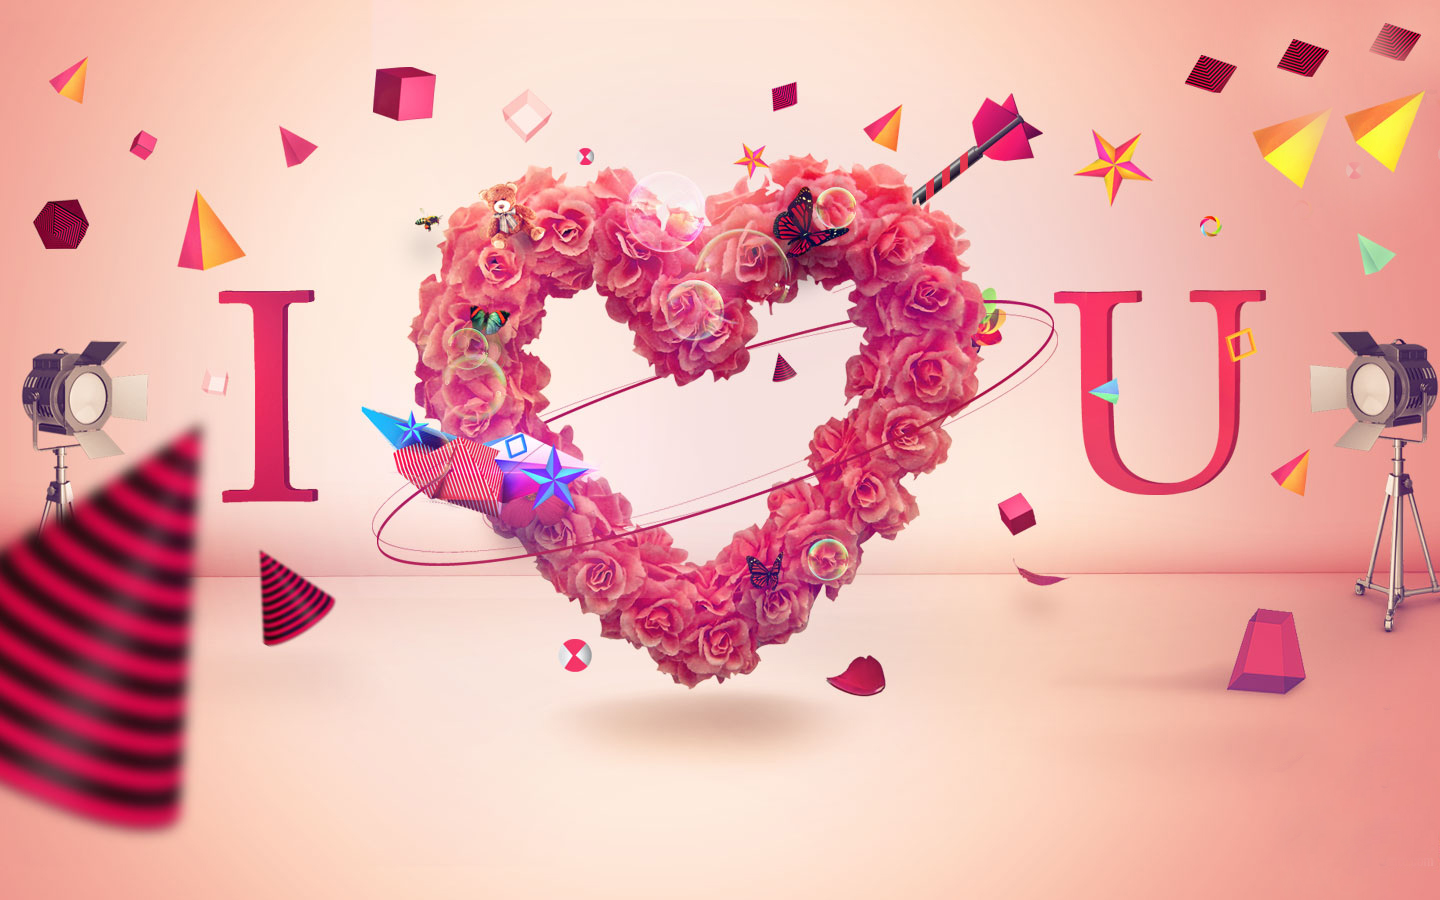 love you wallpapers love 3d wallpapers love 3d vector images love